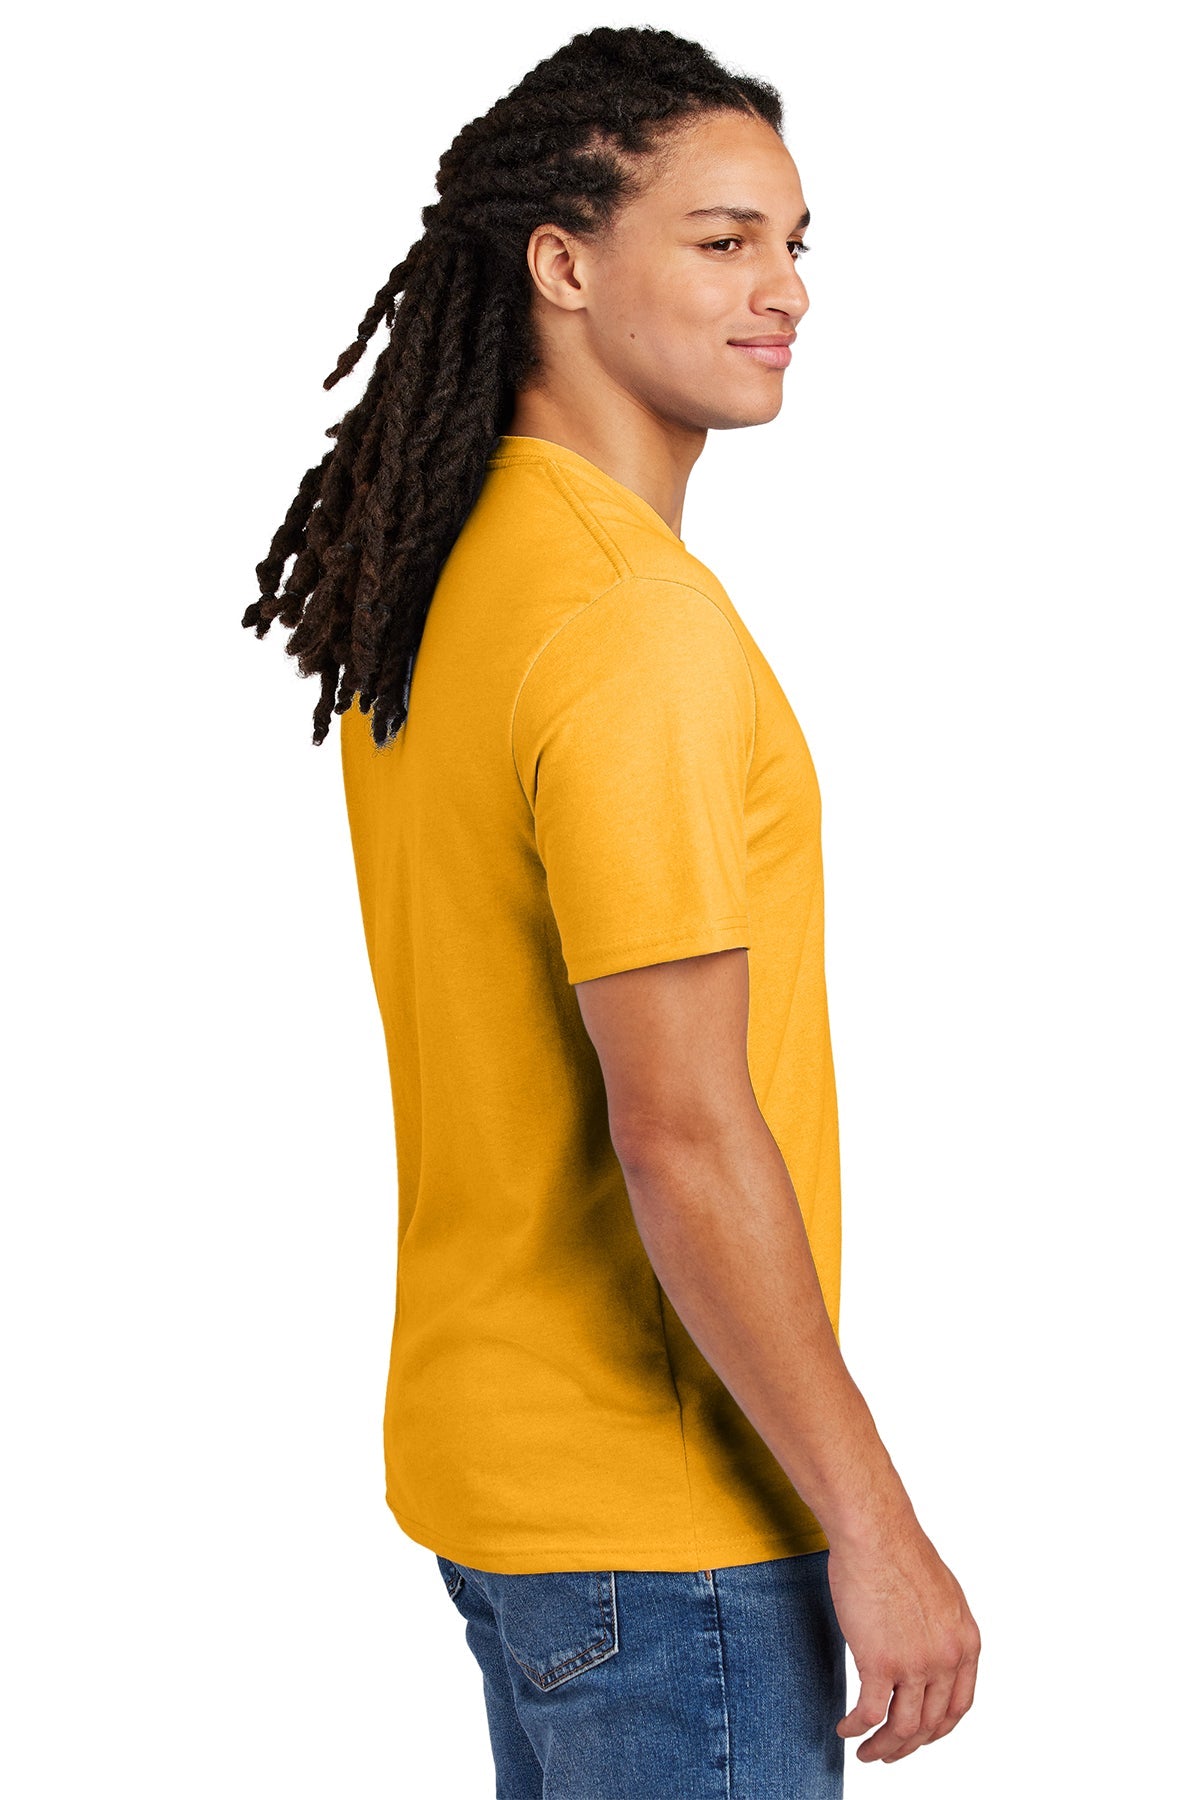 district re-tee dt8000 maize yellow